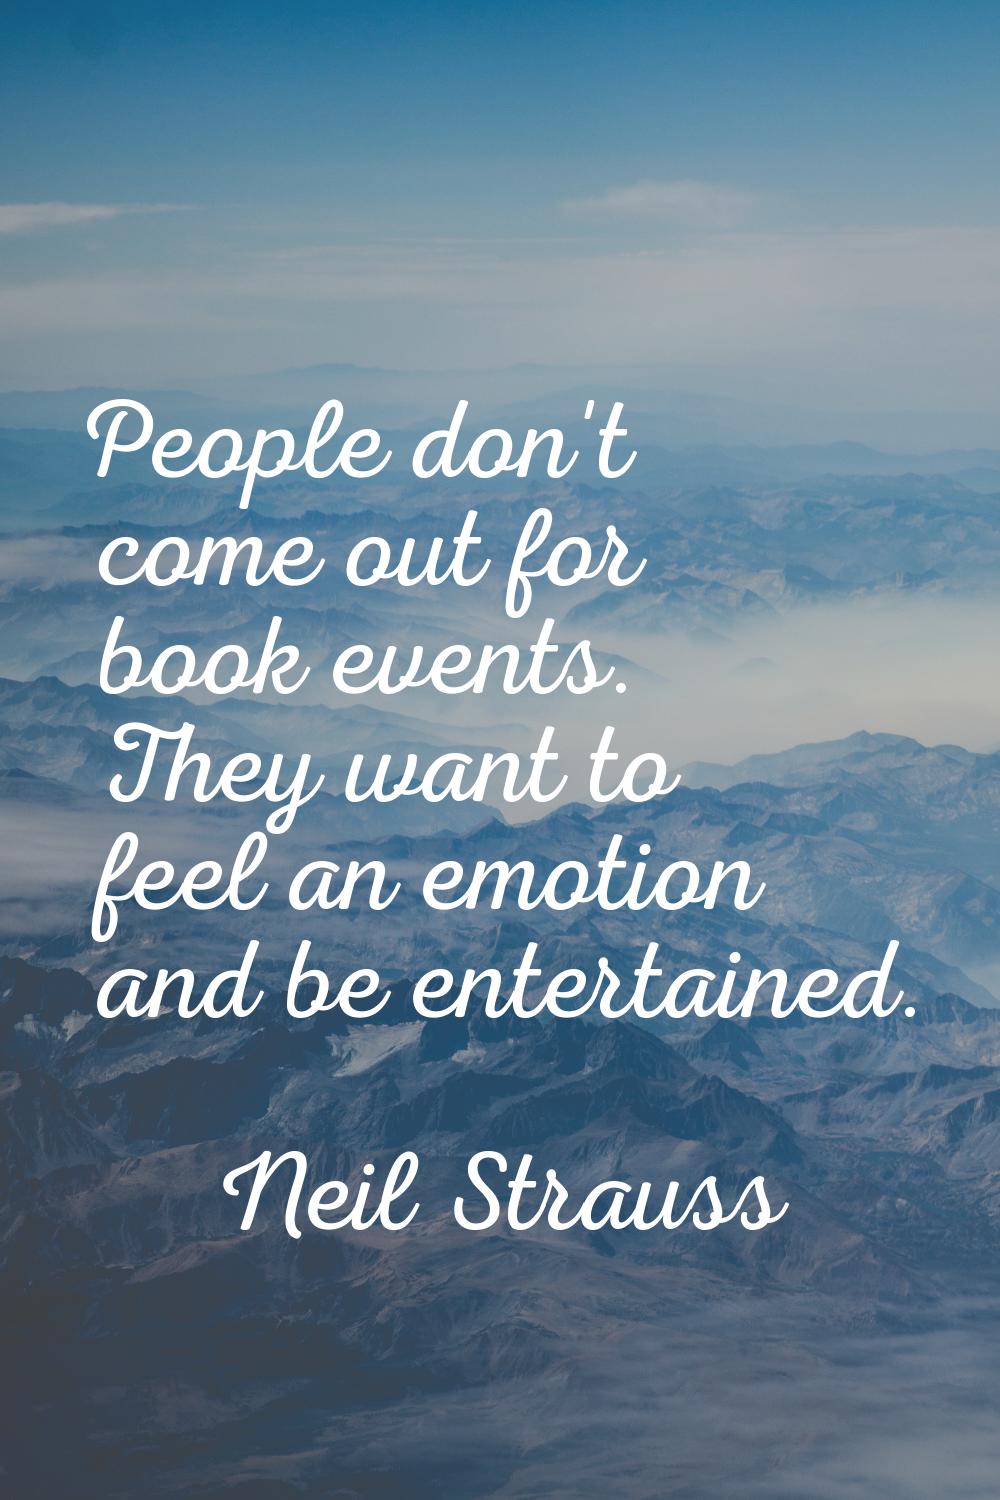 People don't come out for book events. They want to feel an emotion and be entertained.